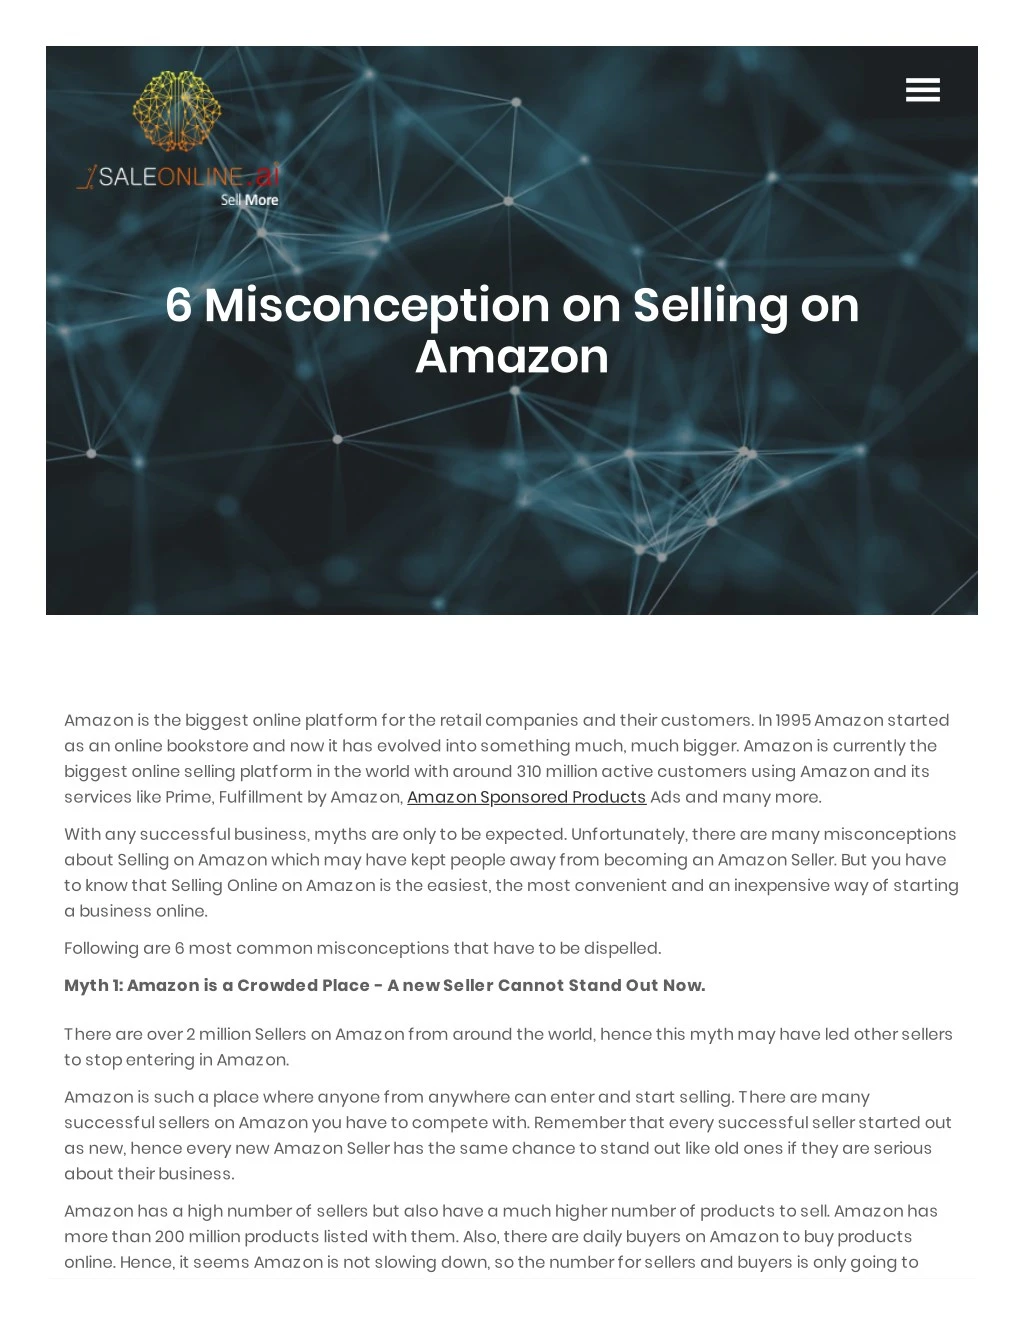 6 misconception on selling on amazon